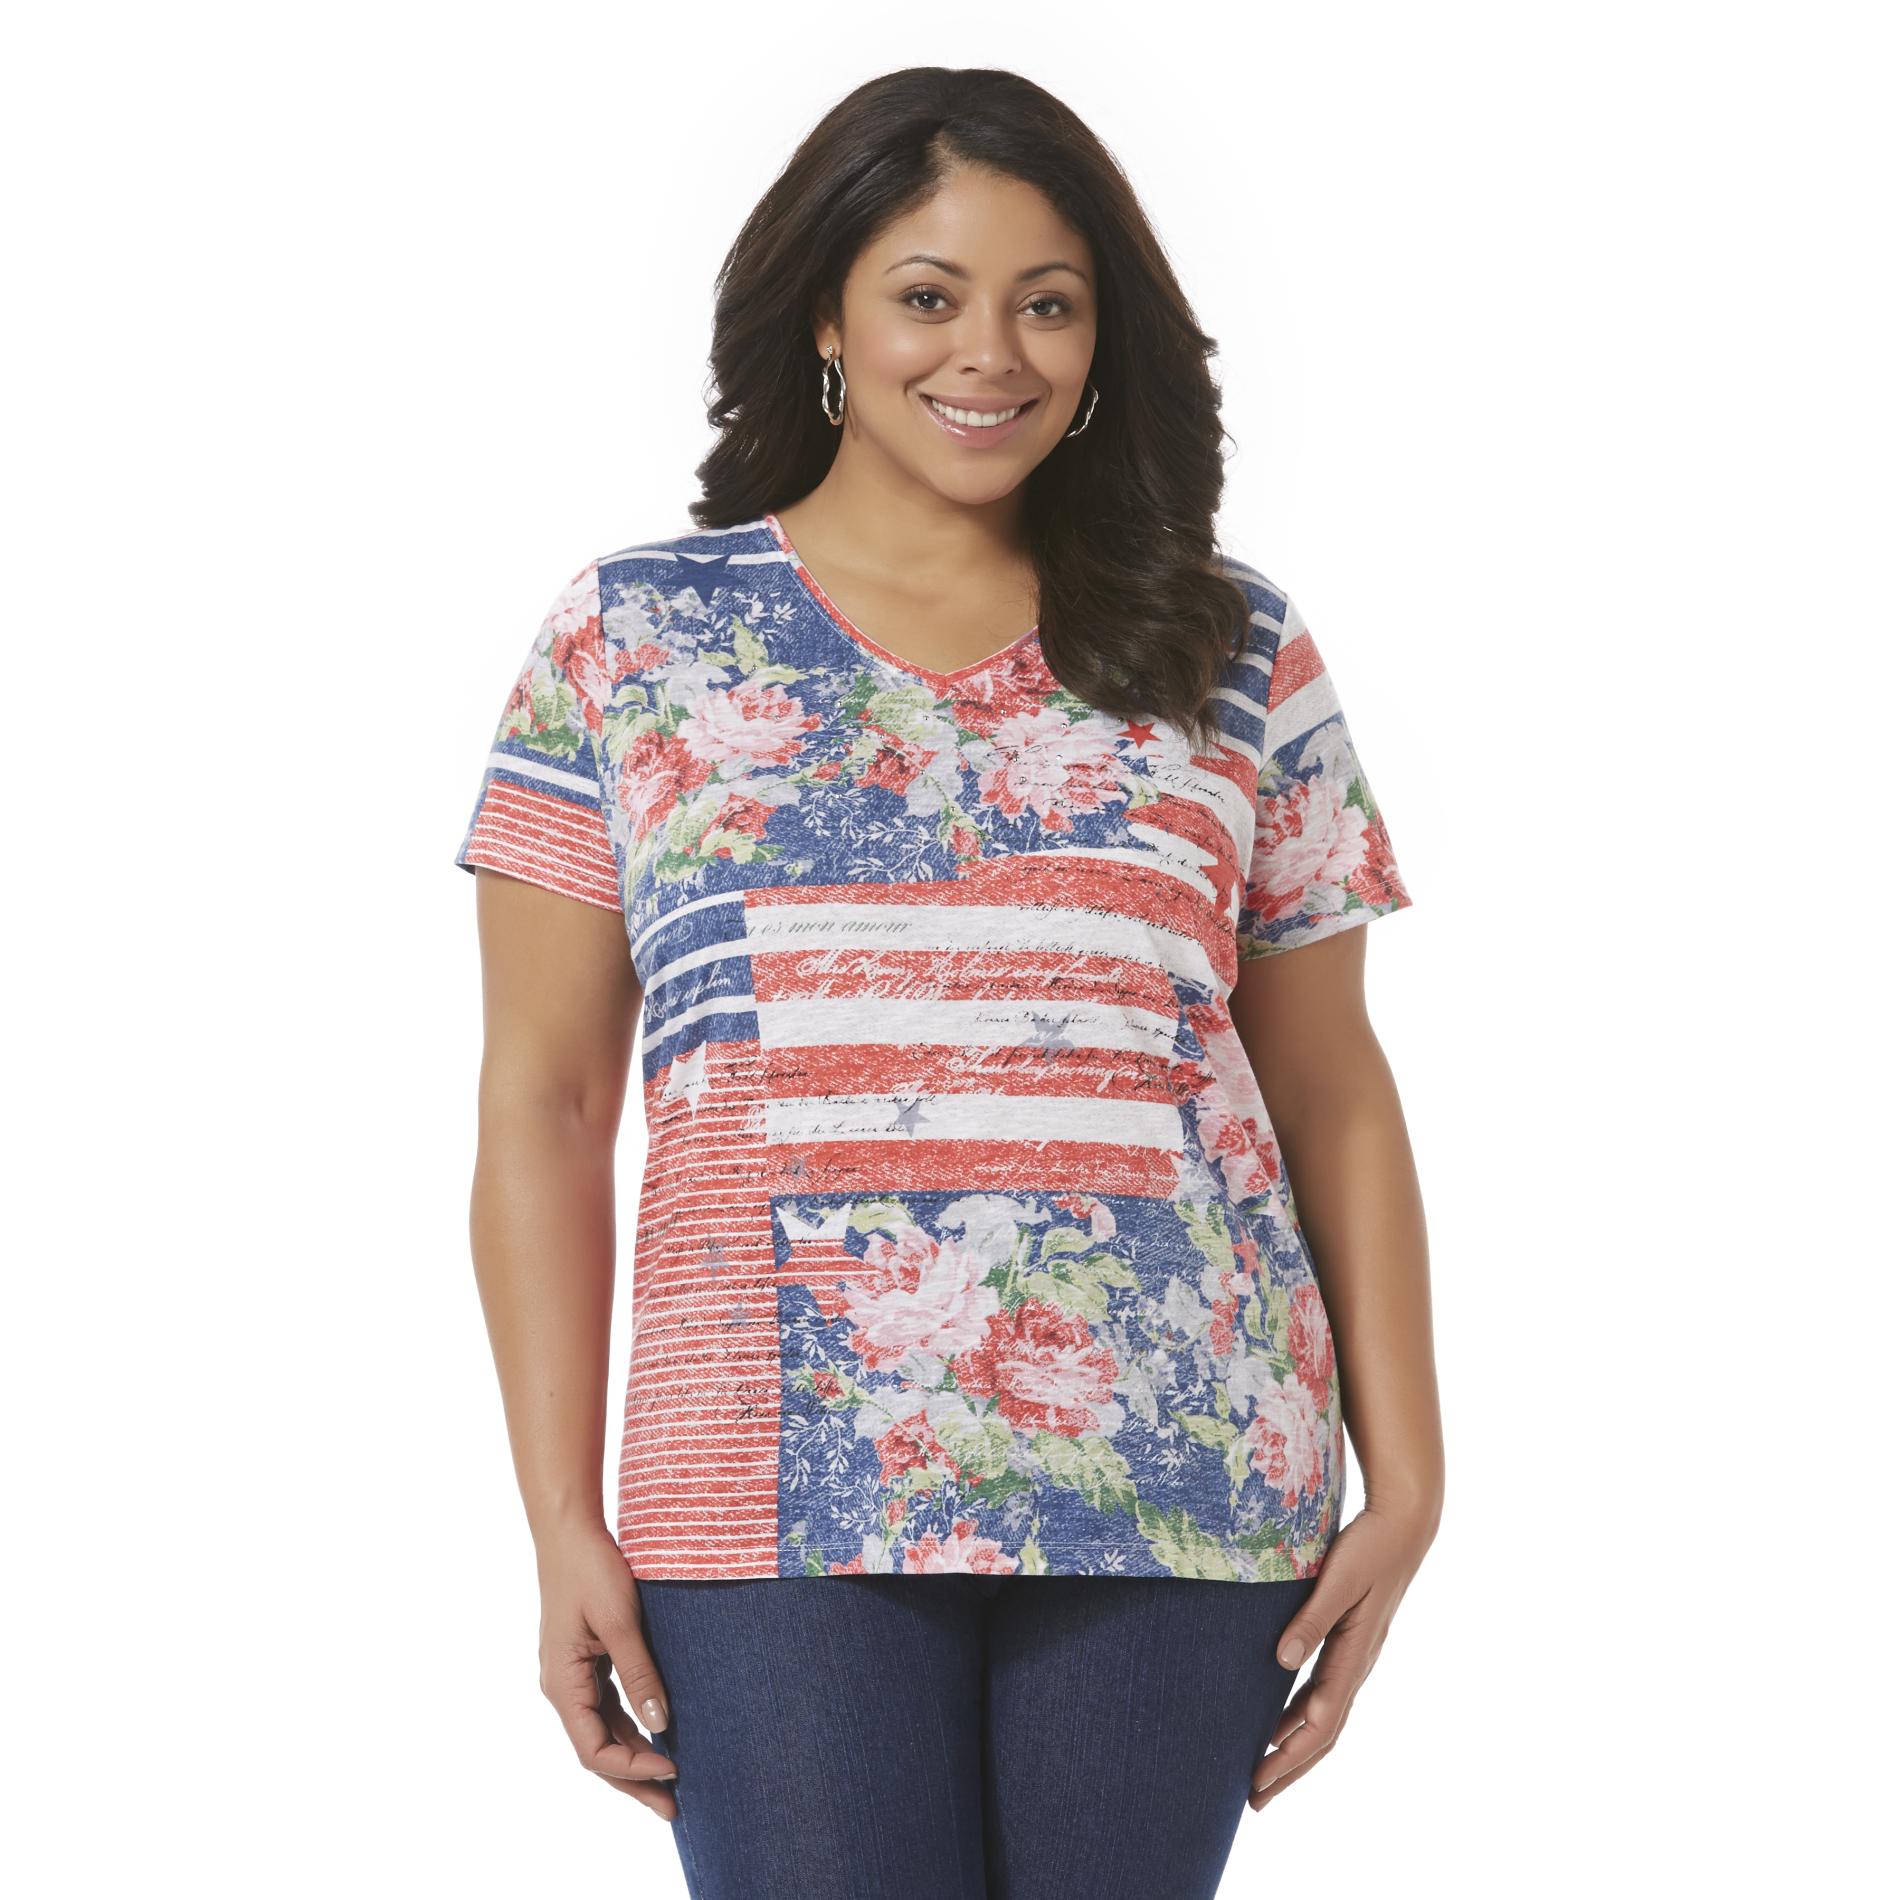 Holiday Editions Women's Plus T-Shirt - American Flag